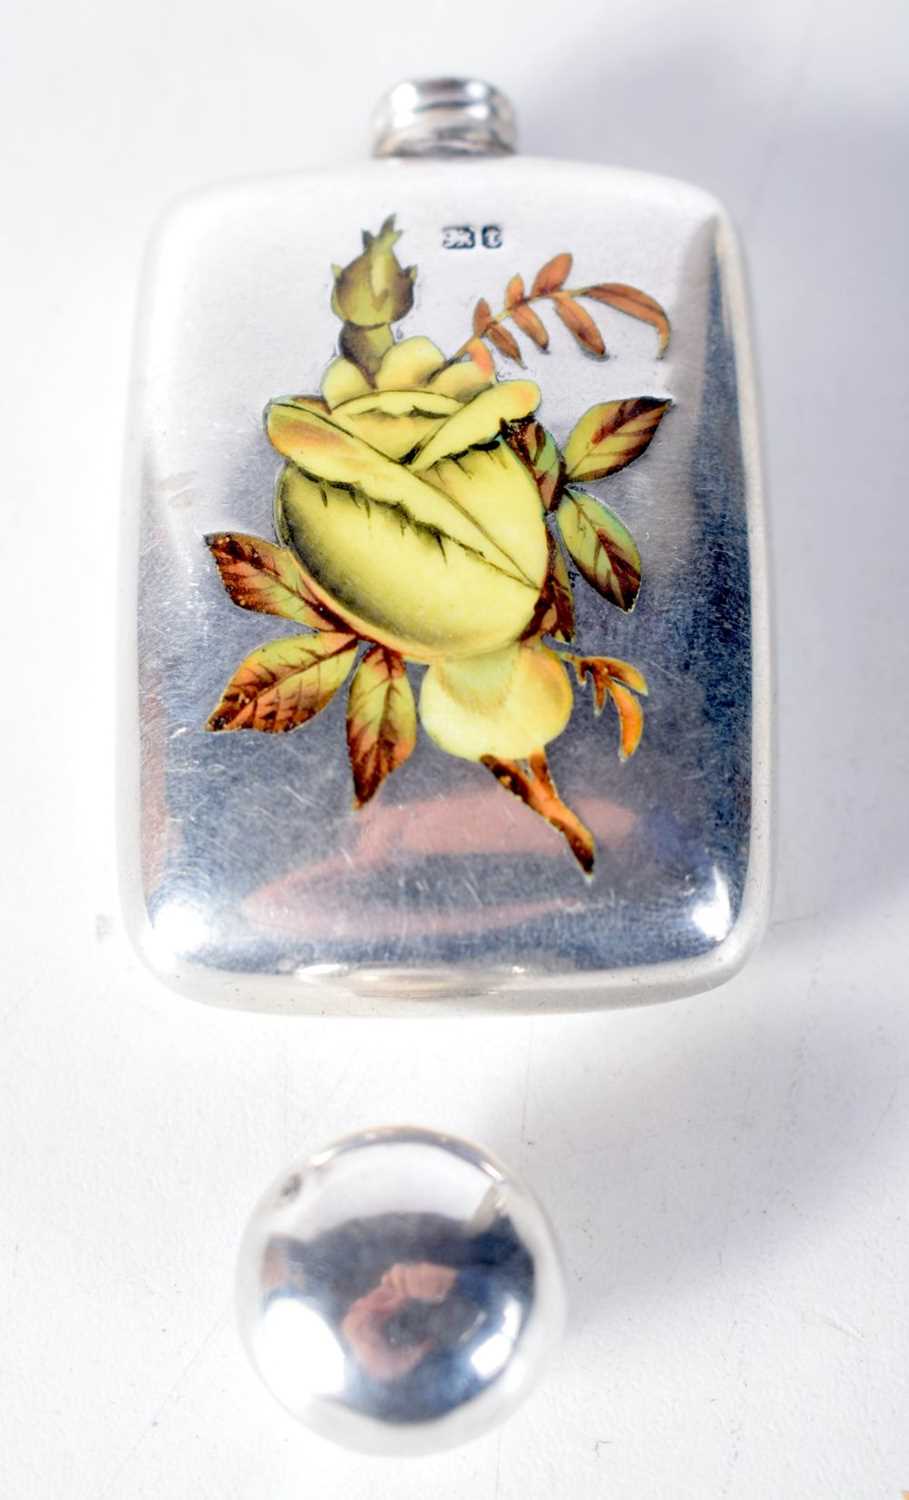 AN ANTIQUE ENGLISH SILVER AND ENAMEL SCENT BOTTLE. 34 grams. 7 cm x 4 cm. - Image 3 of 3